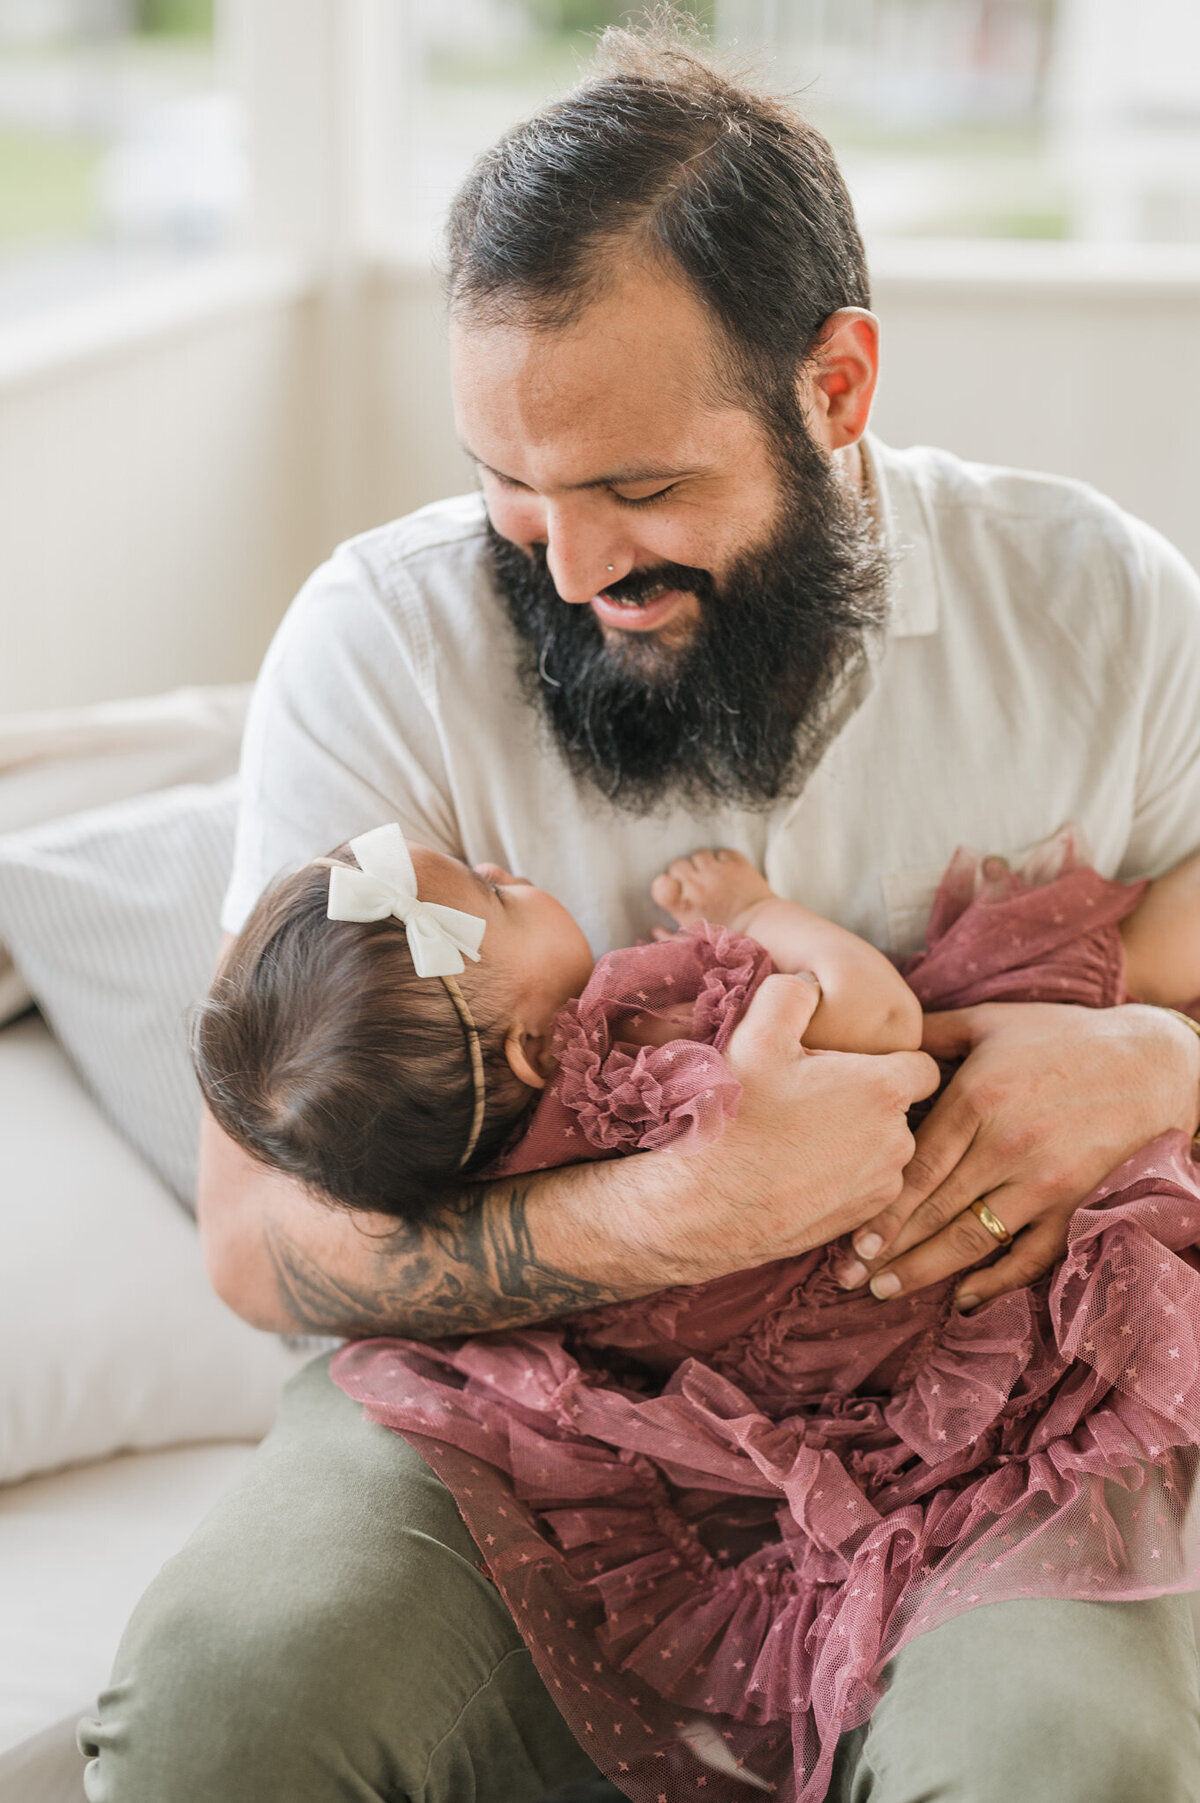 Dad snuggles his little girl during a San Antonio family photography session.